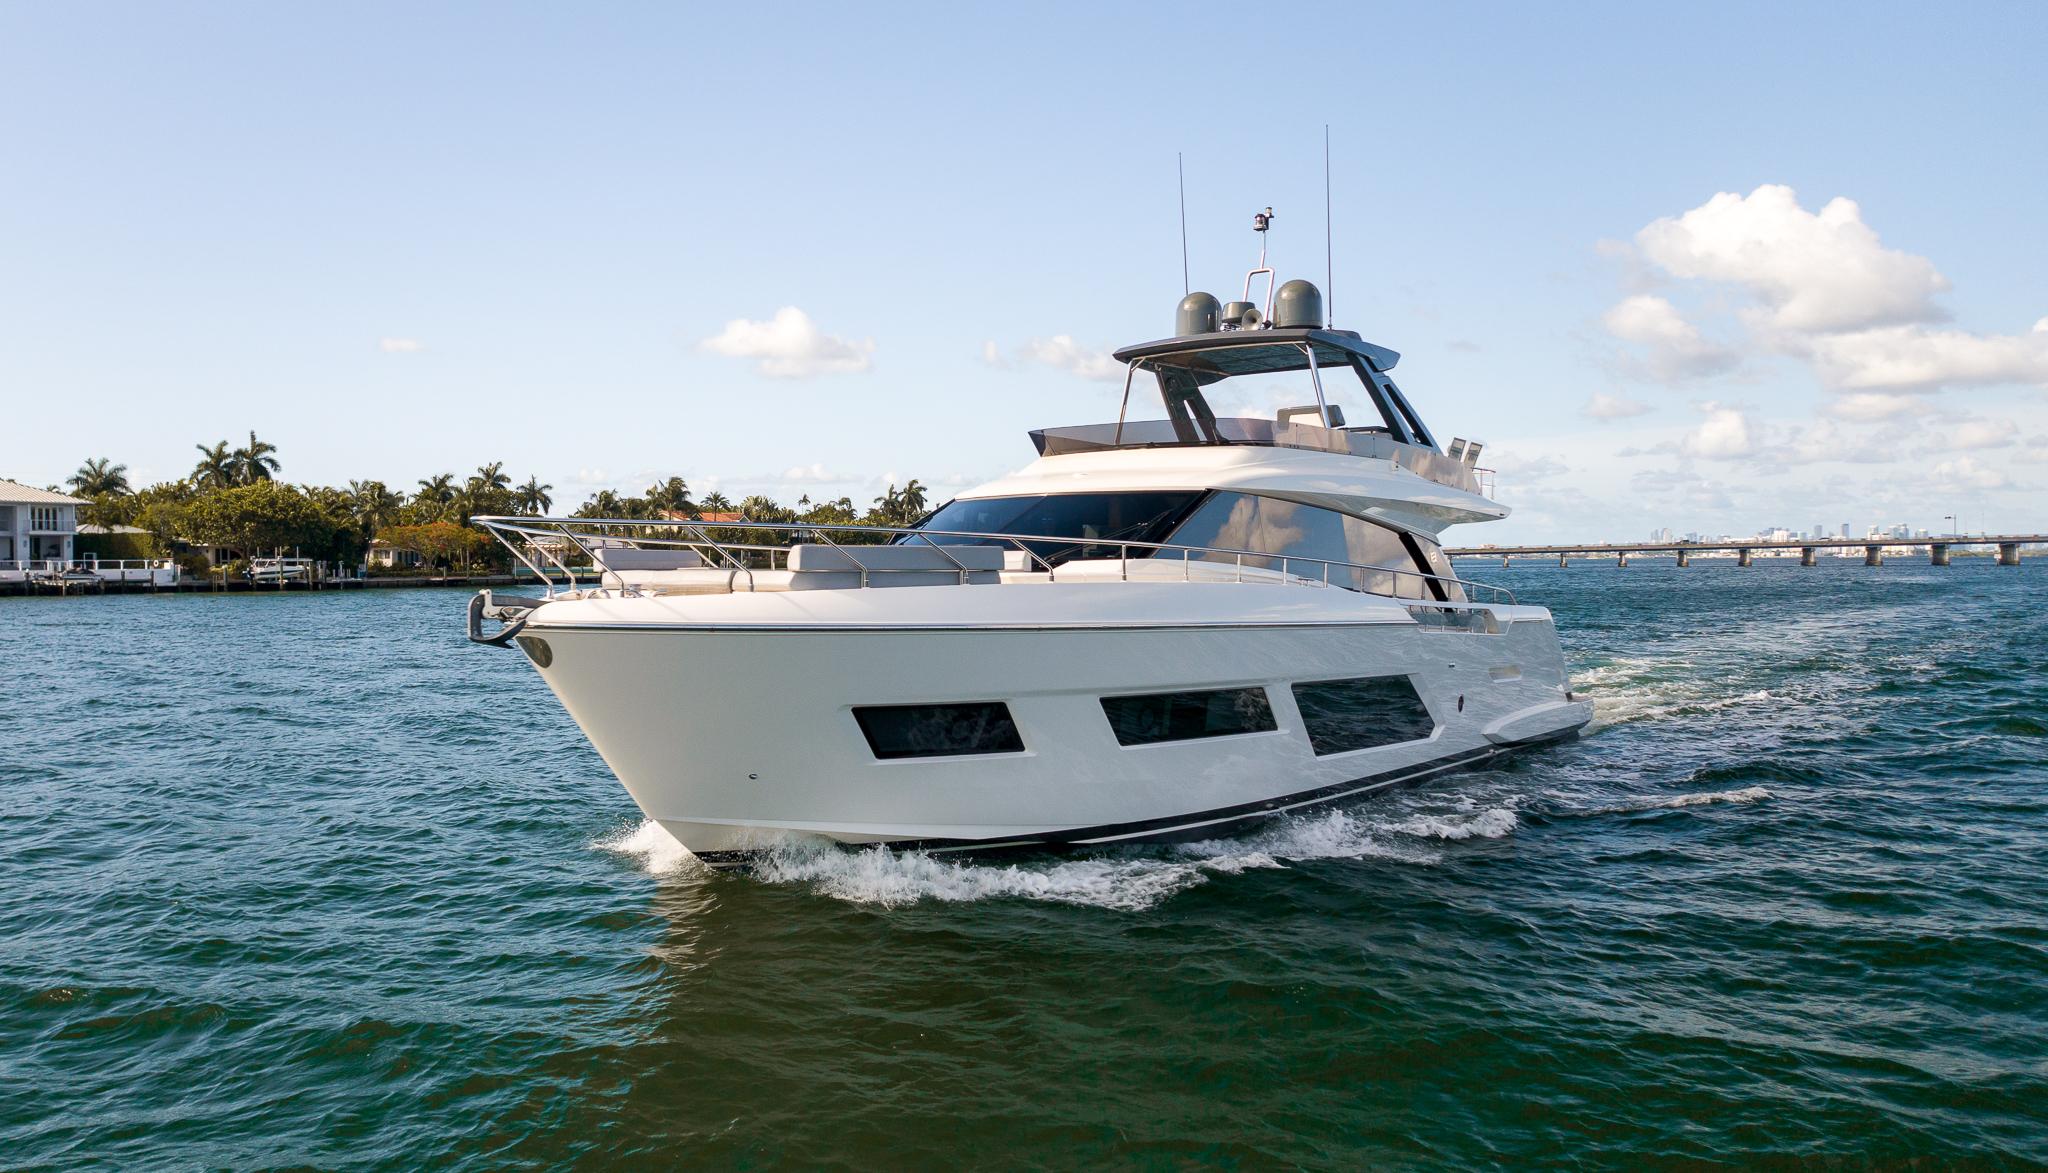 67 foot yacht for sale